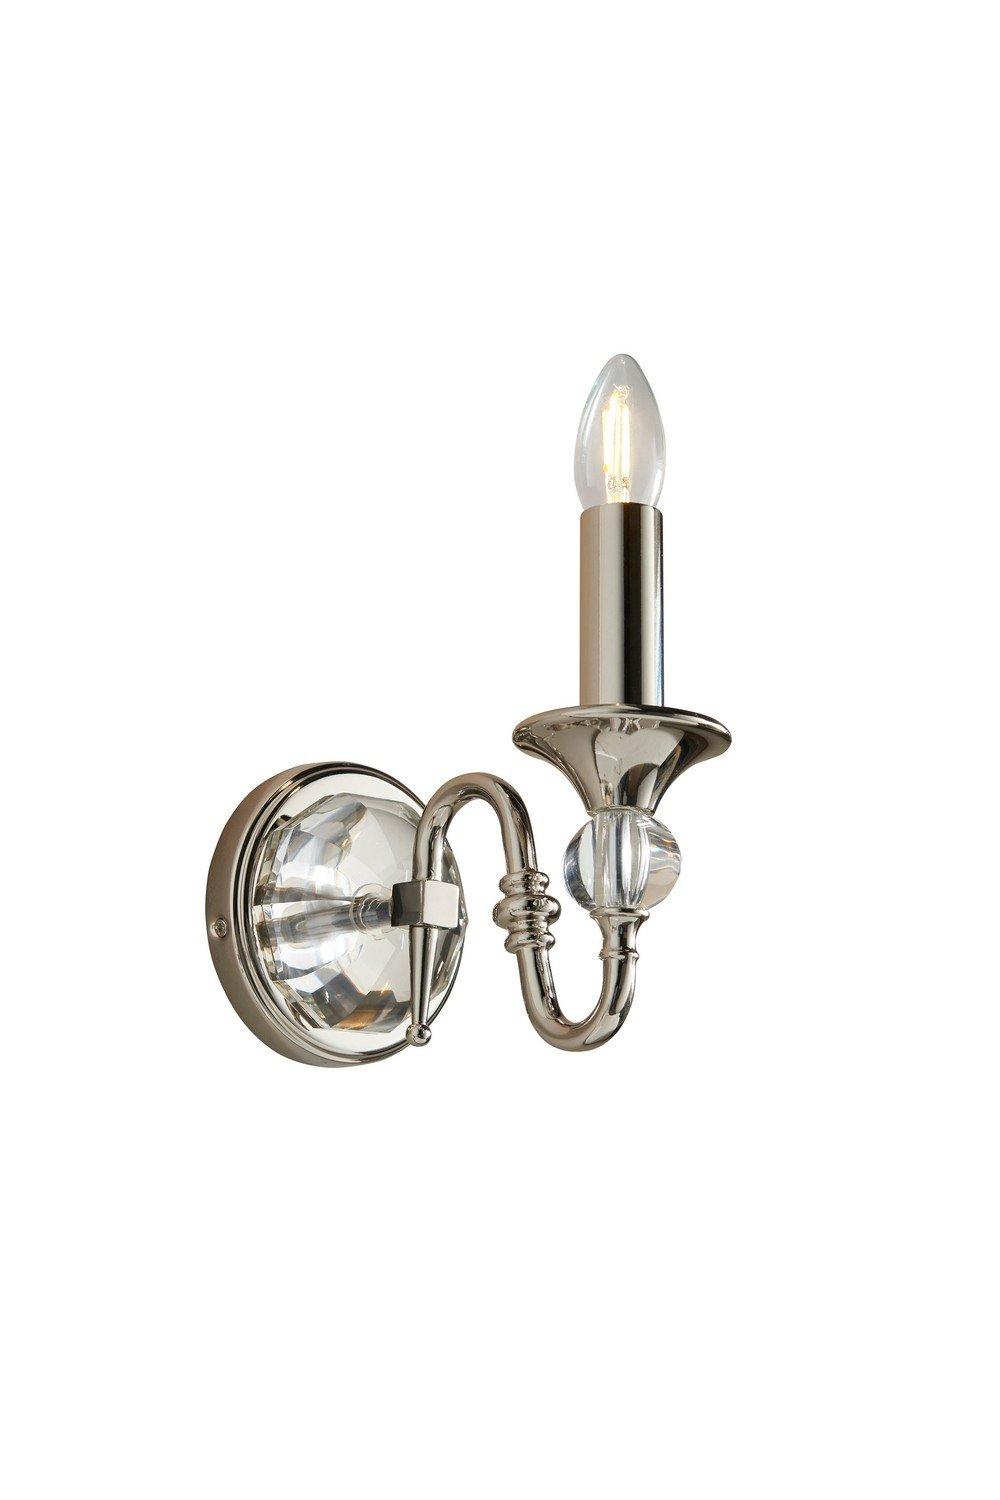 Polina 1 Light Indoor Candle Wall Light Polished Nickel Plate with Crystal E14